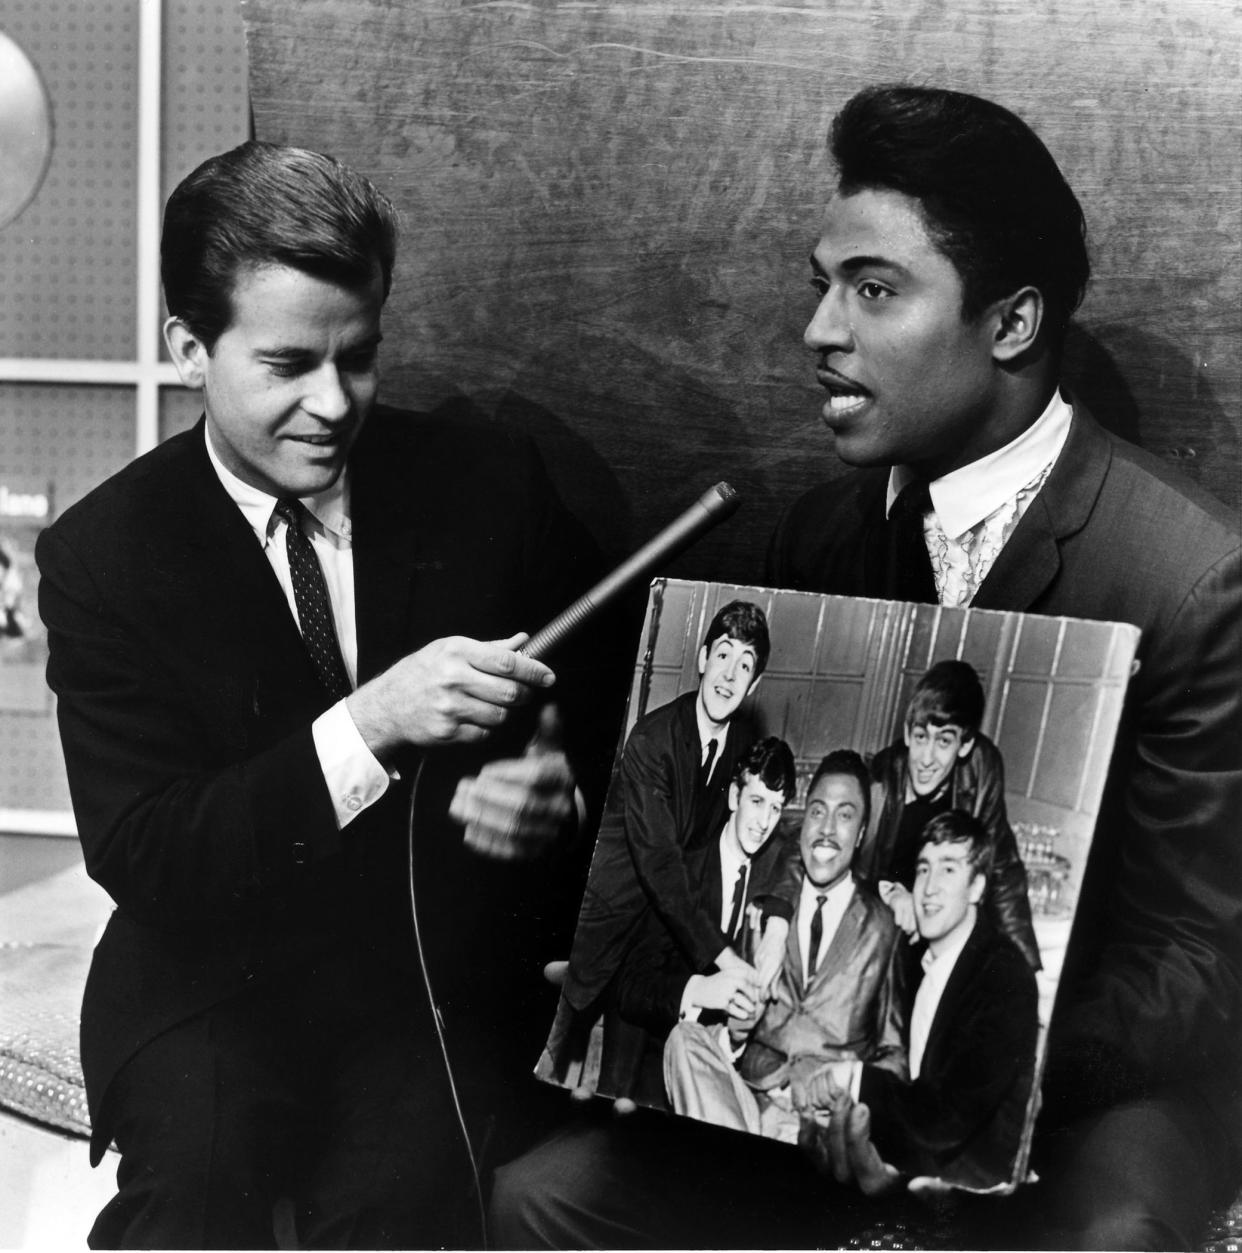 UNITED STATES - JULY 24:  AMERICAN BANDSTAND - Dick Clark - 7/24/64, Dick Clark (left, with guest Little Richard holding a picture of the Beatles) hosted 